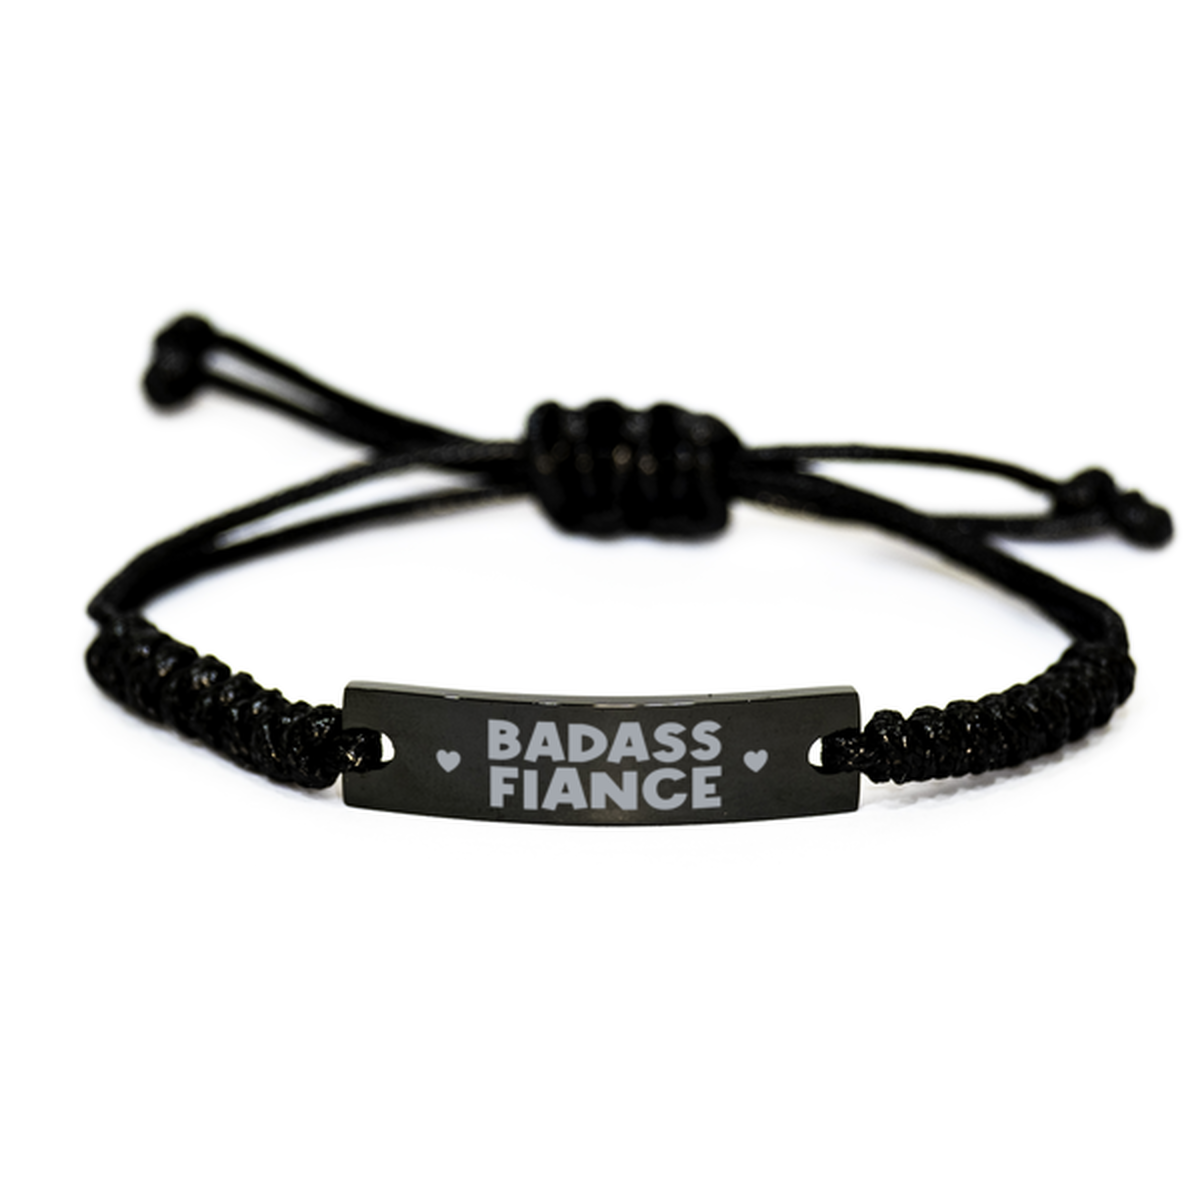 Fiance Rope Bracelet, Badass Fiance, Funny Family Gifts For Fiance From Fiancee